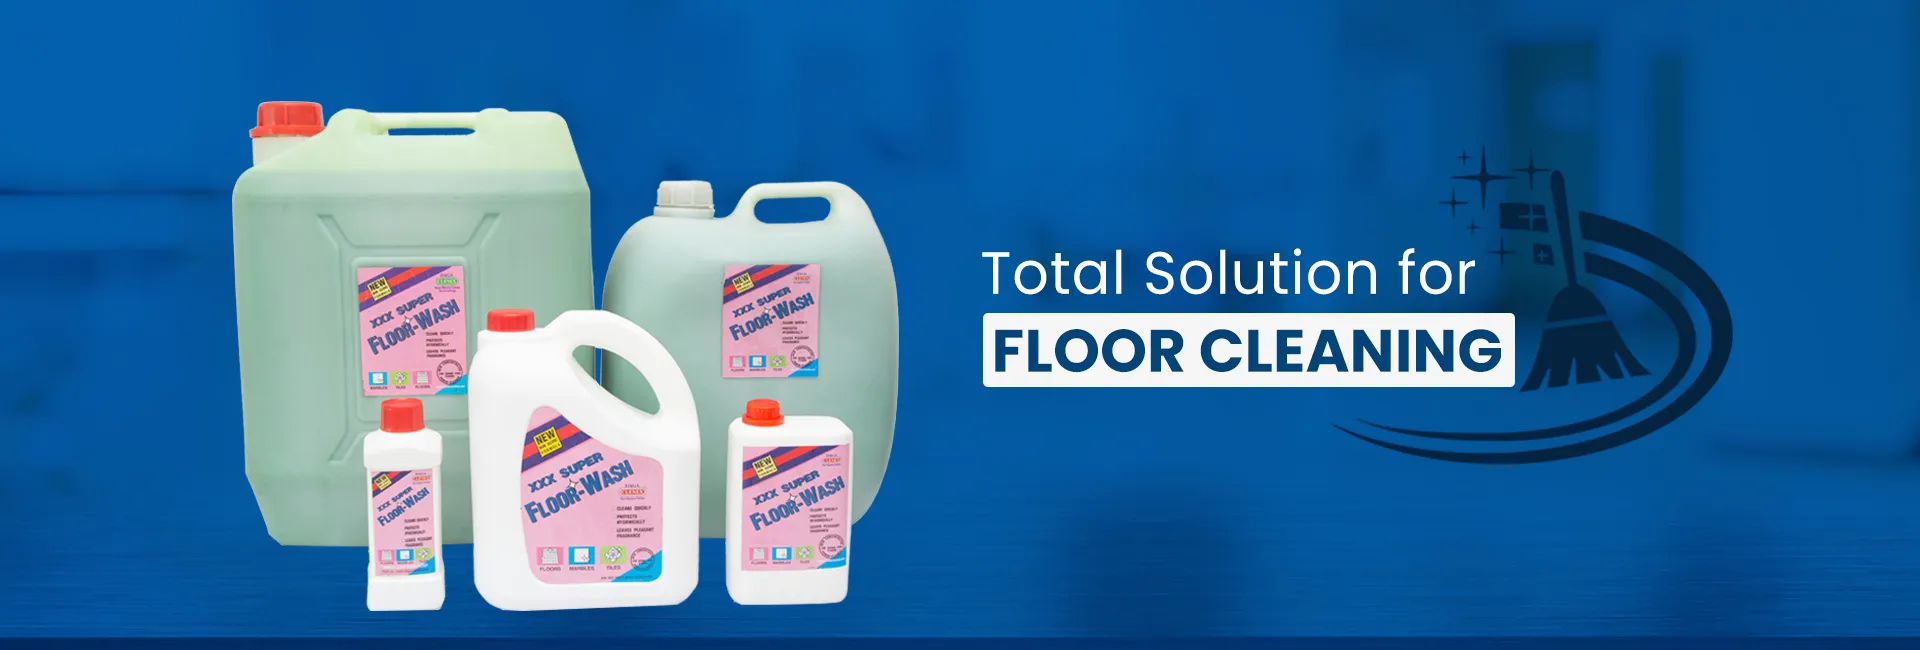 Floor Cleaning Products Manufacturers in India